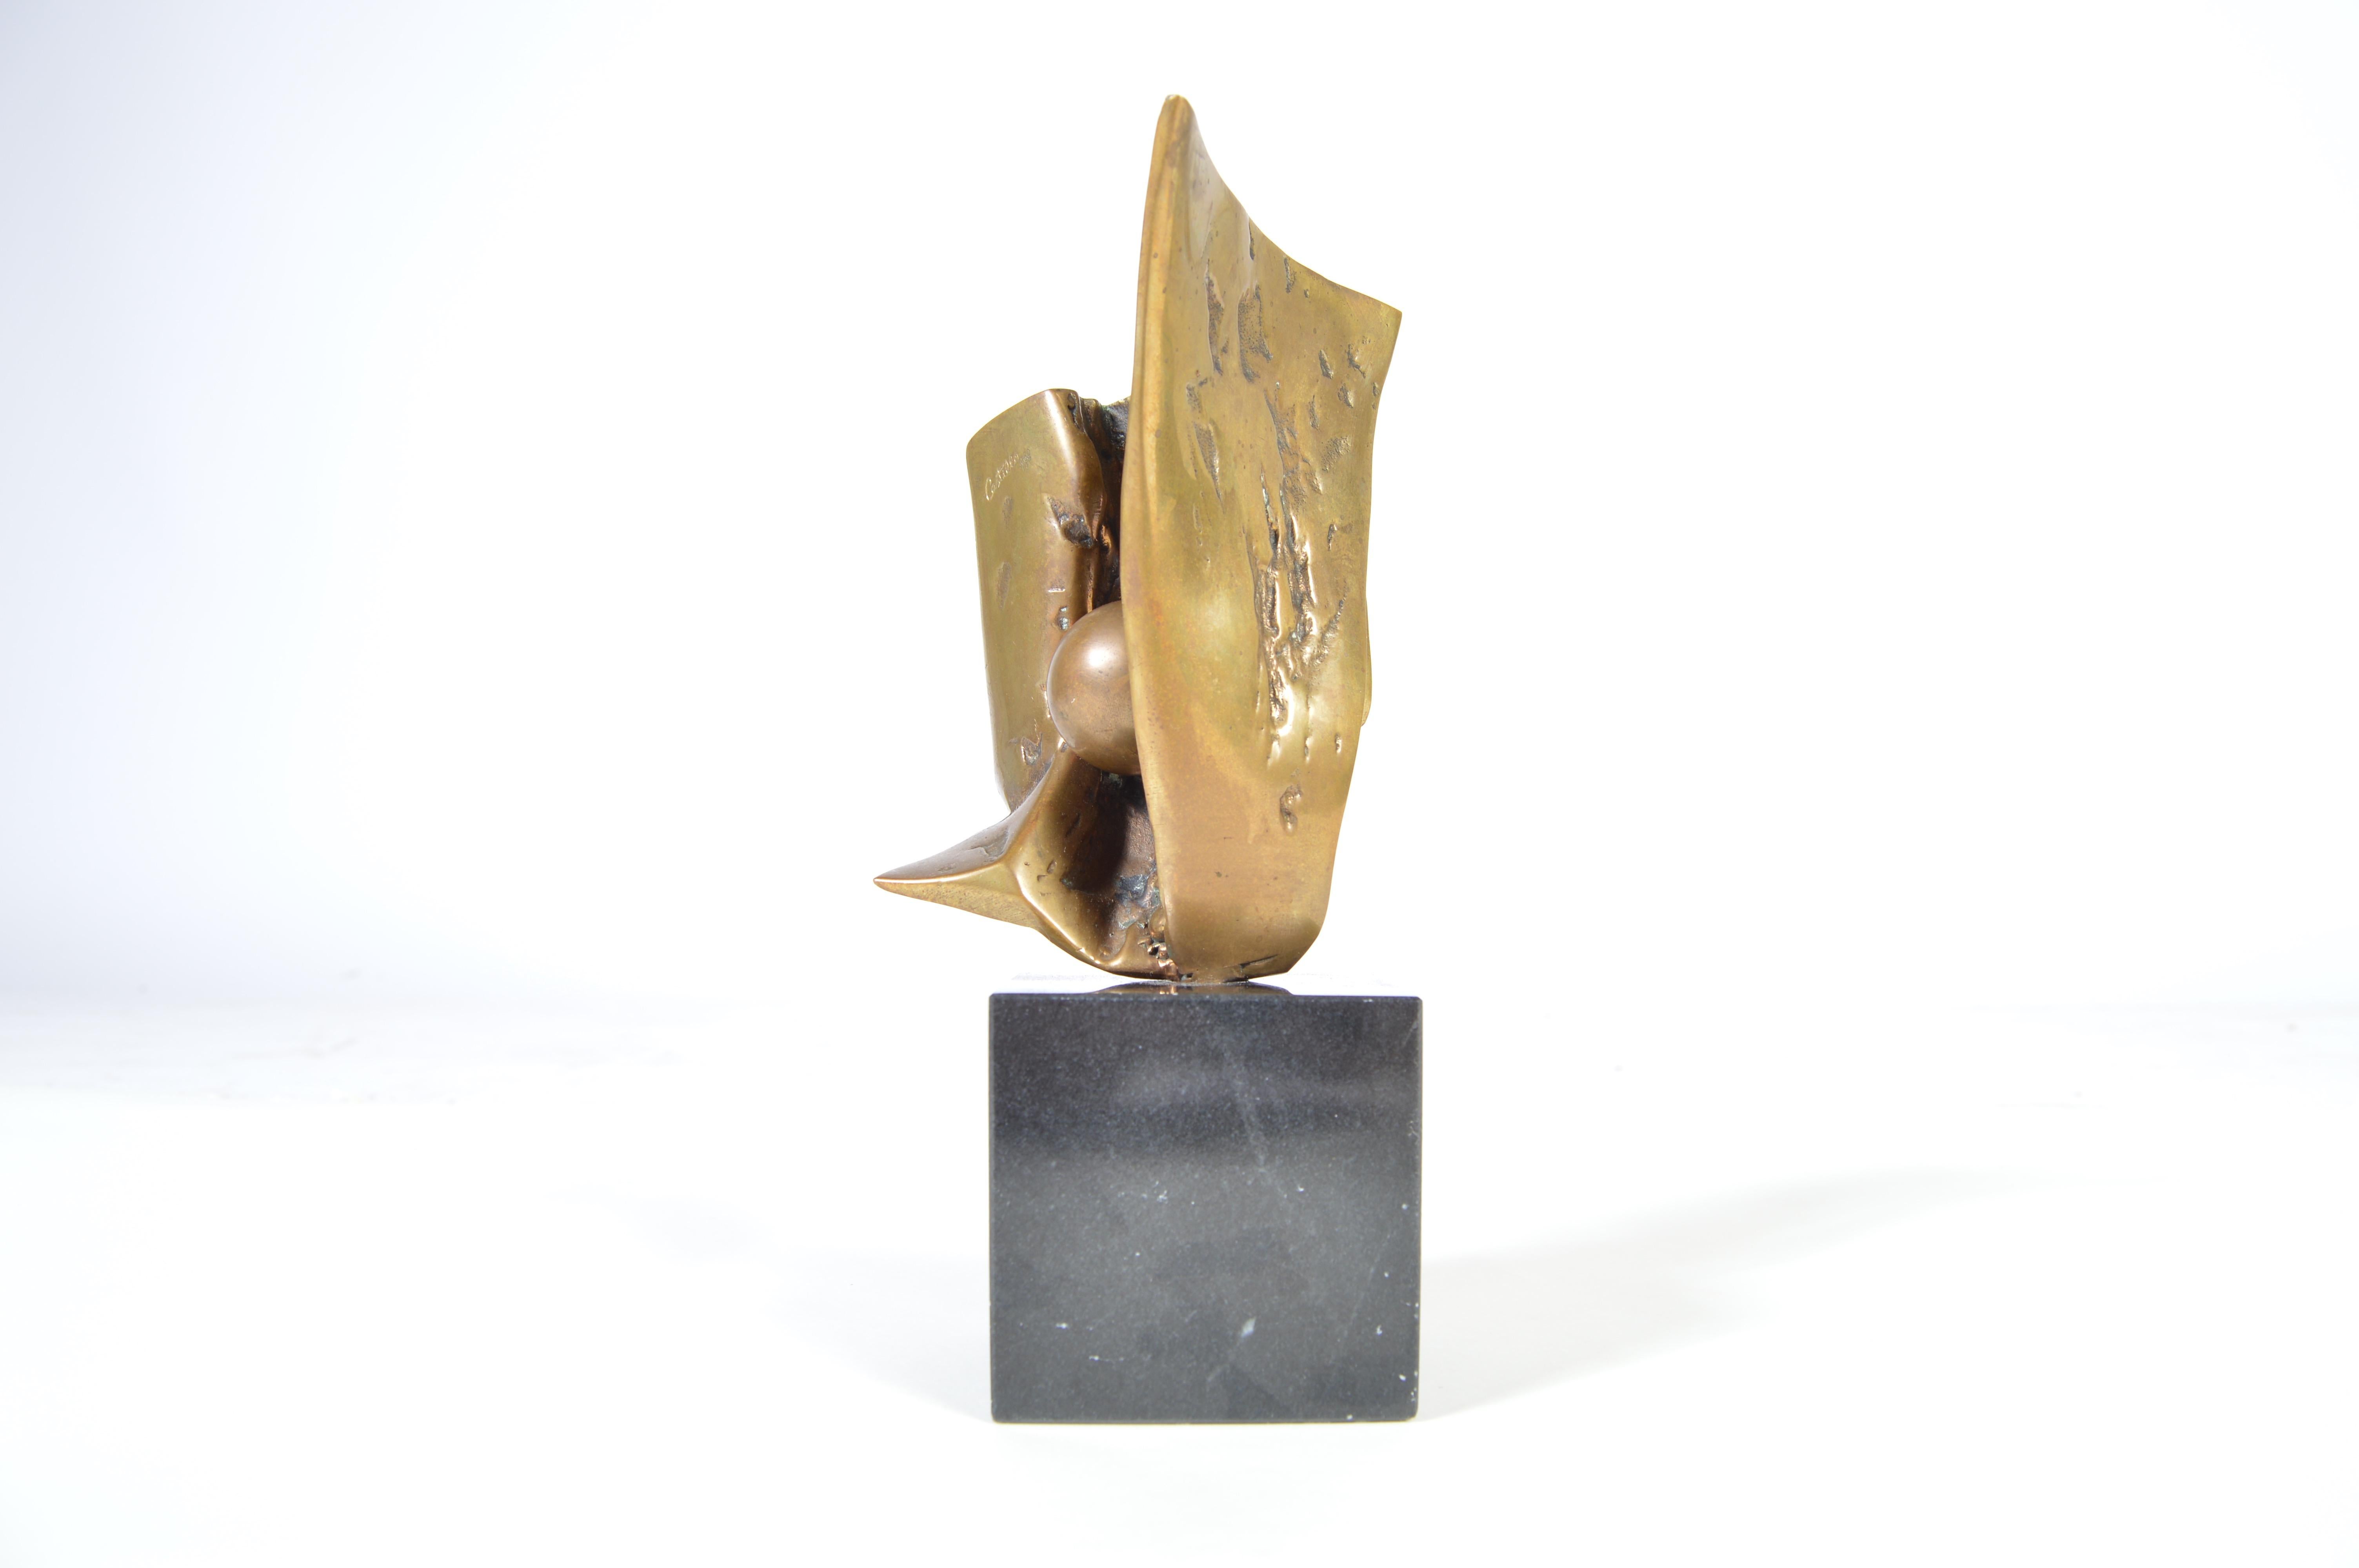 A beautiful small bronze abstract sculpture by Jorge Castillo with granite cube base, circa 1970. Signed and numbered.
Measures: Height 7.75